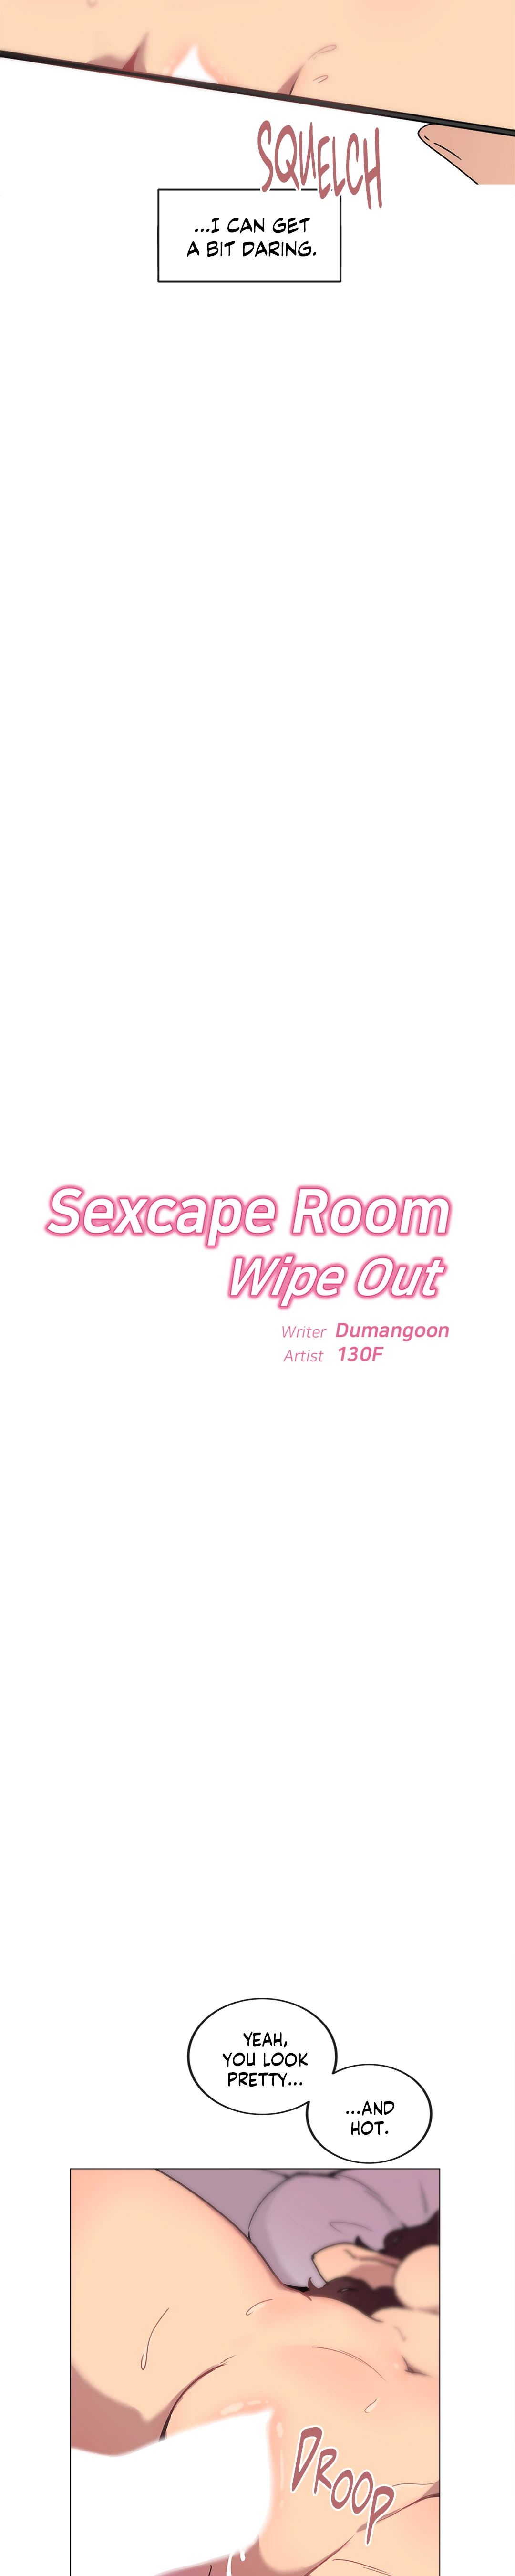 Sexcape Room: Wipe Out image